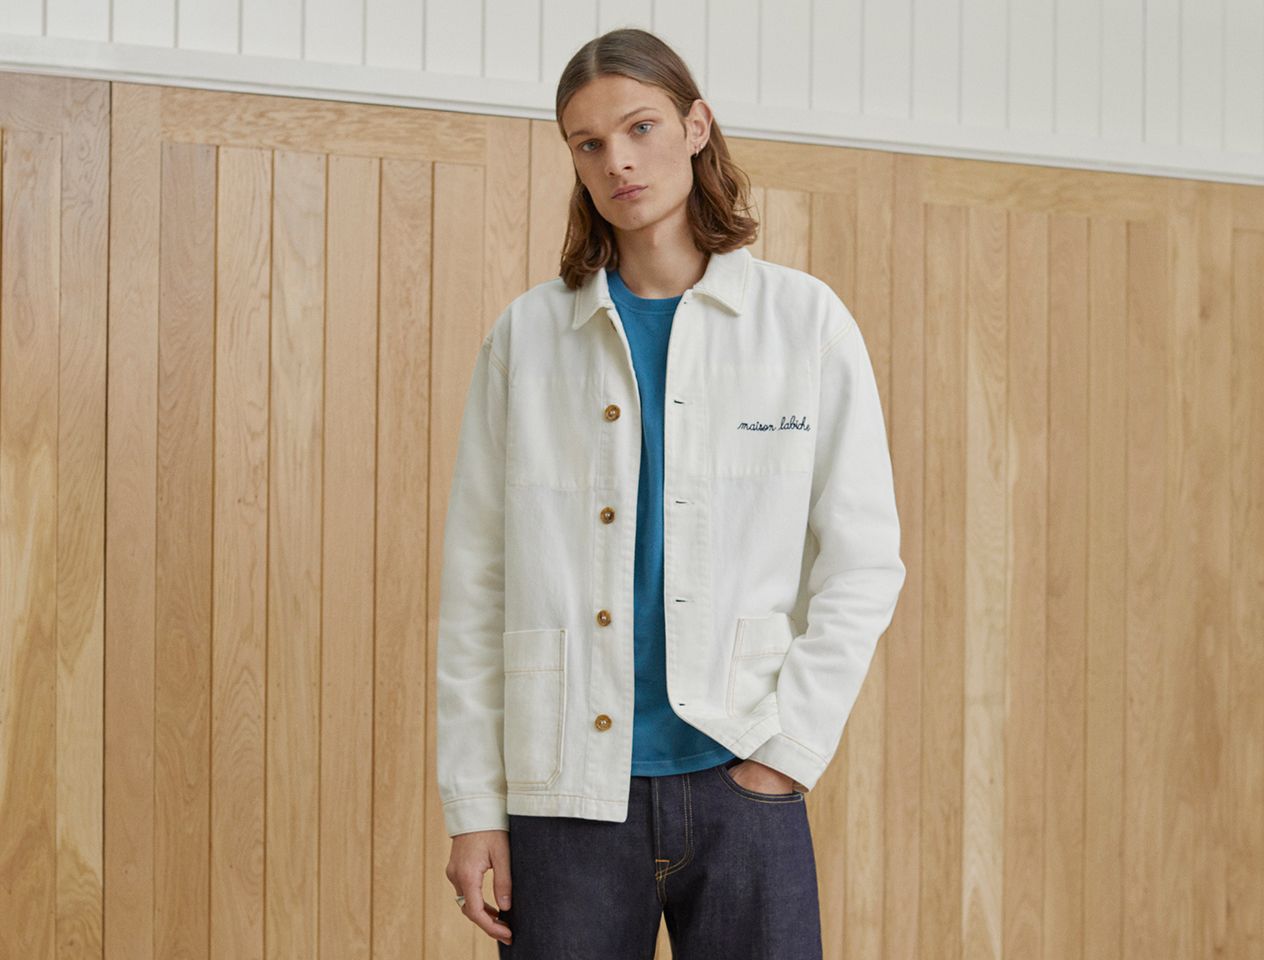 Meet Maison Labiche: well-tailored, easy-to-wear staples with a twist